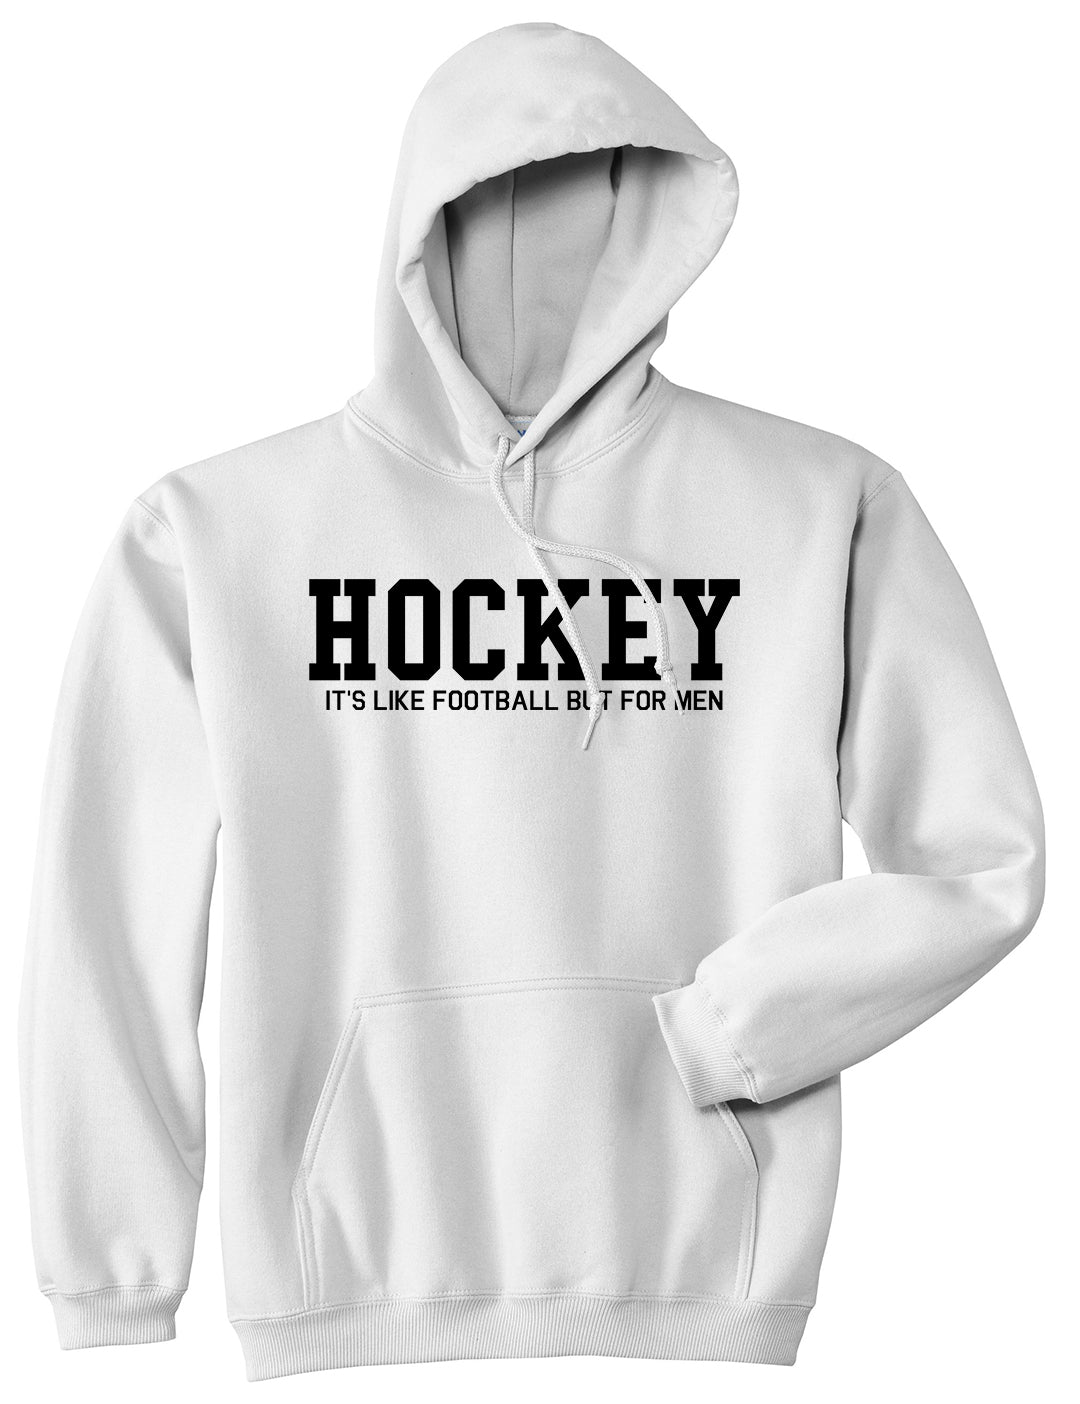 Hockey Its Like Football But For Men Funny Mens Pullover Hoodie White